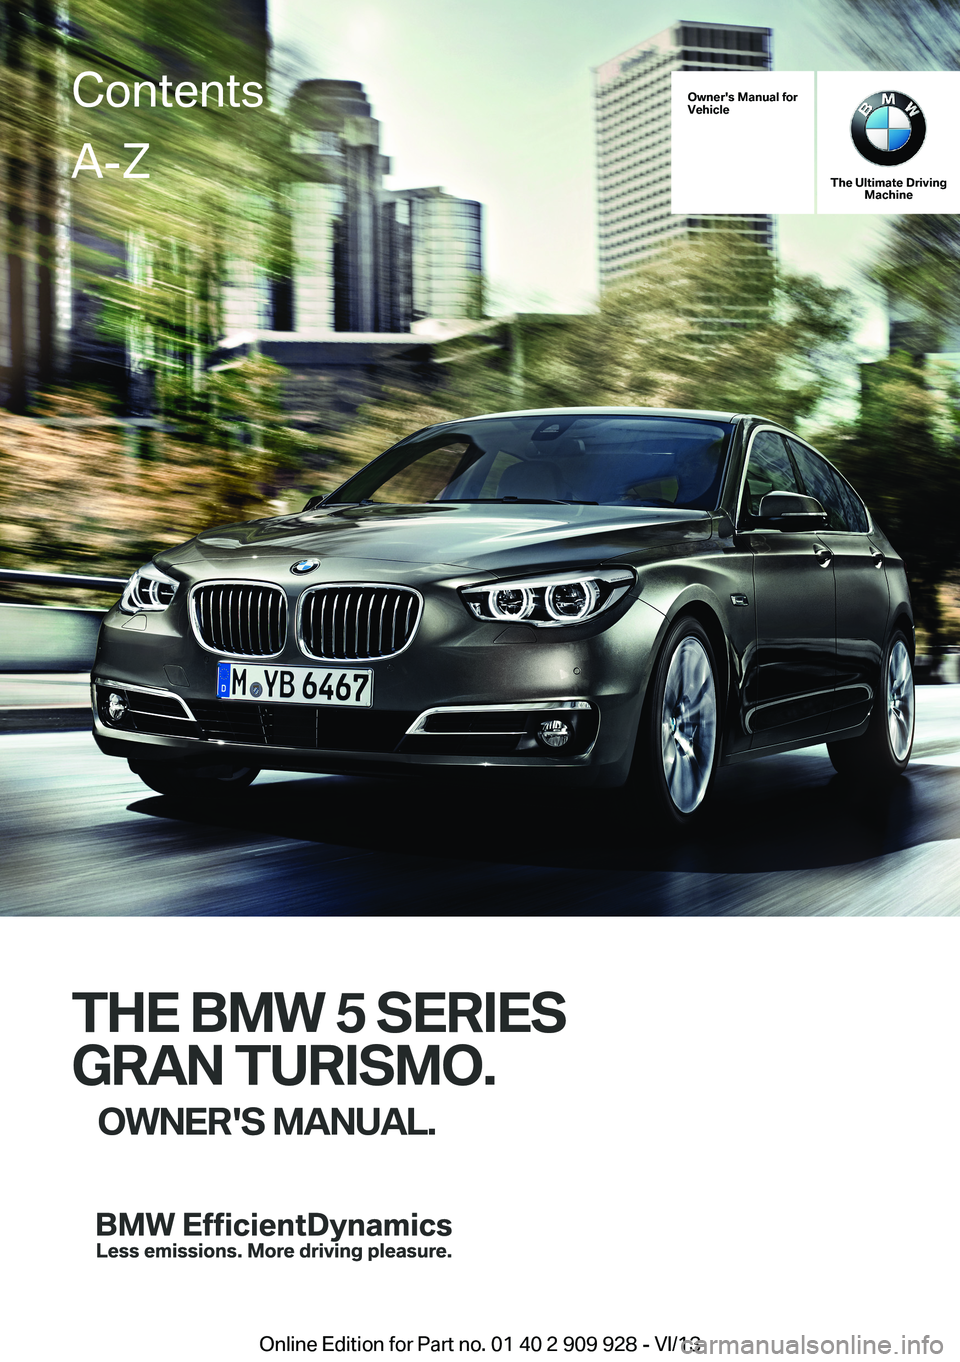 BMW 550I GRAN TURISMO 2014  Owners Manual Owner's Manual forVehicle
The Ultimate DrivingMachine
THE BMW 5 SERIES
GRAN TURISMO.
OWNER'S MANUAL.
ContentsA-Z
Online Edition for Part no. 01 40 2 909 928 - VI/13   